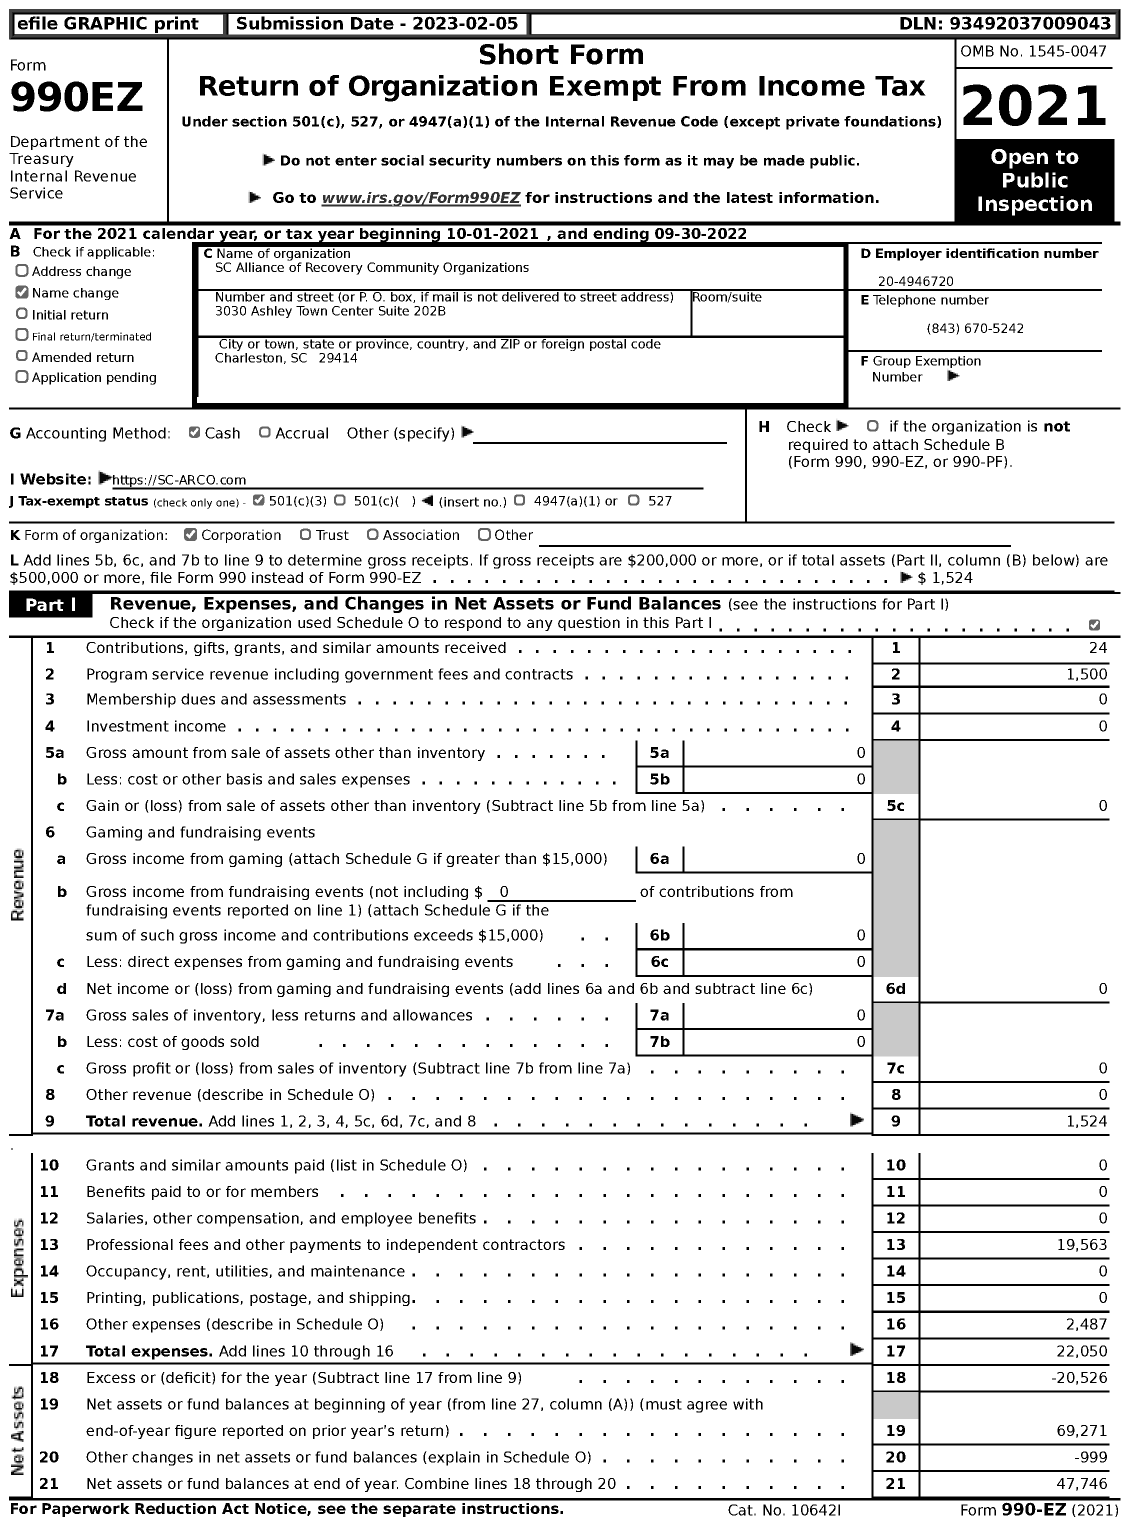 Image of first page of 2021 Form 990EZ for SC Alliance of Recovery Community Organizations